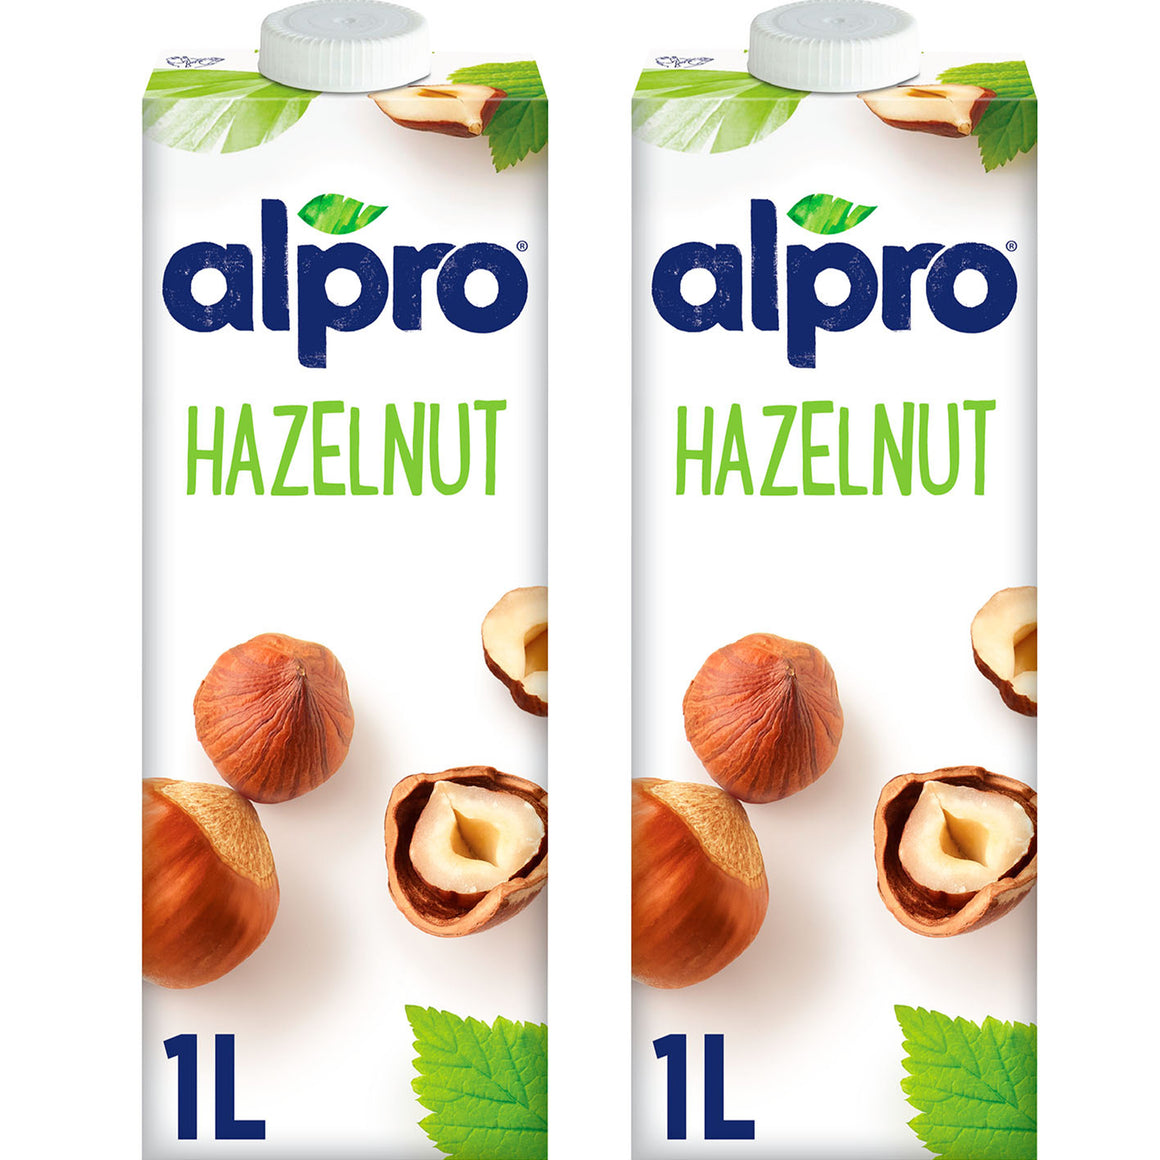 Alpro Drink Hazelnut Original Dual Pack (1l x 2), 100% Plant Based And Dairy Free, Suitable For Vegans, Naturally Free From Lactose, Rich In Nutrients